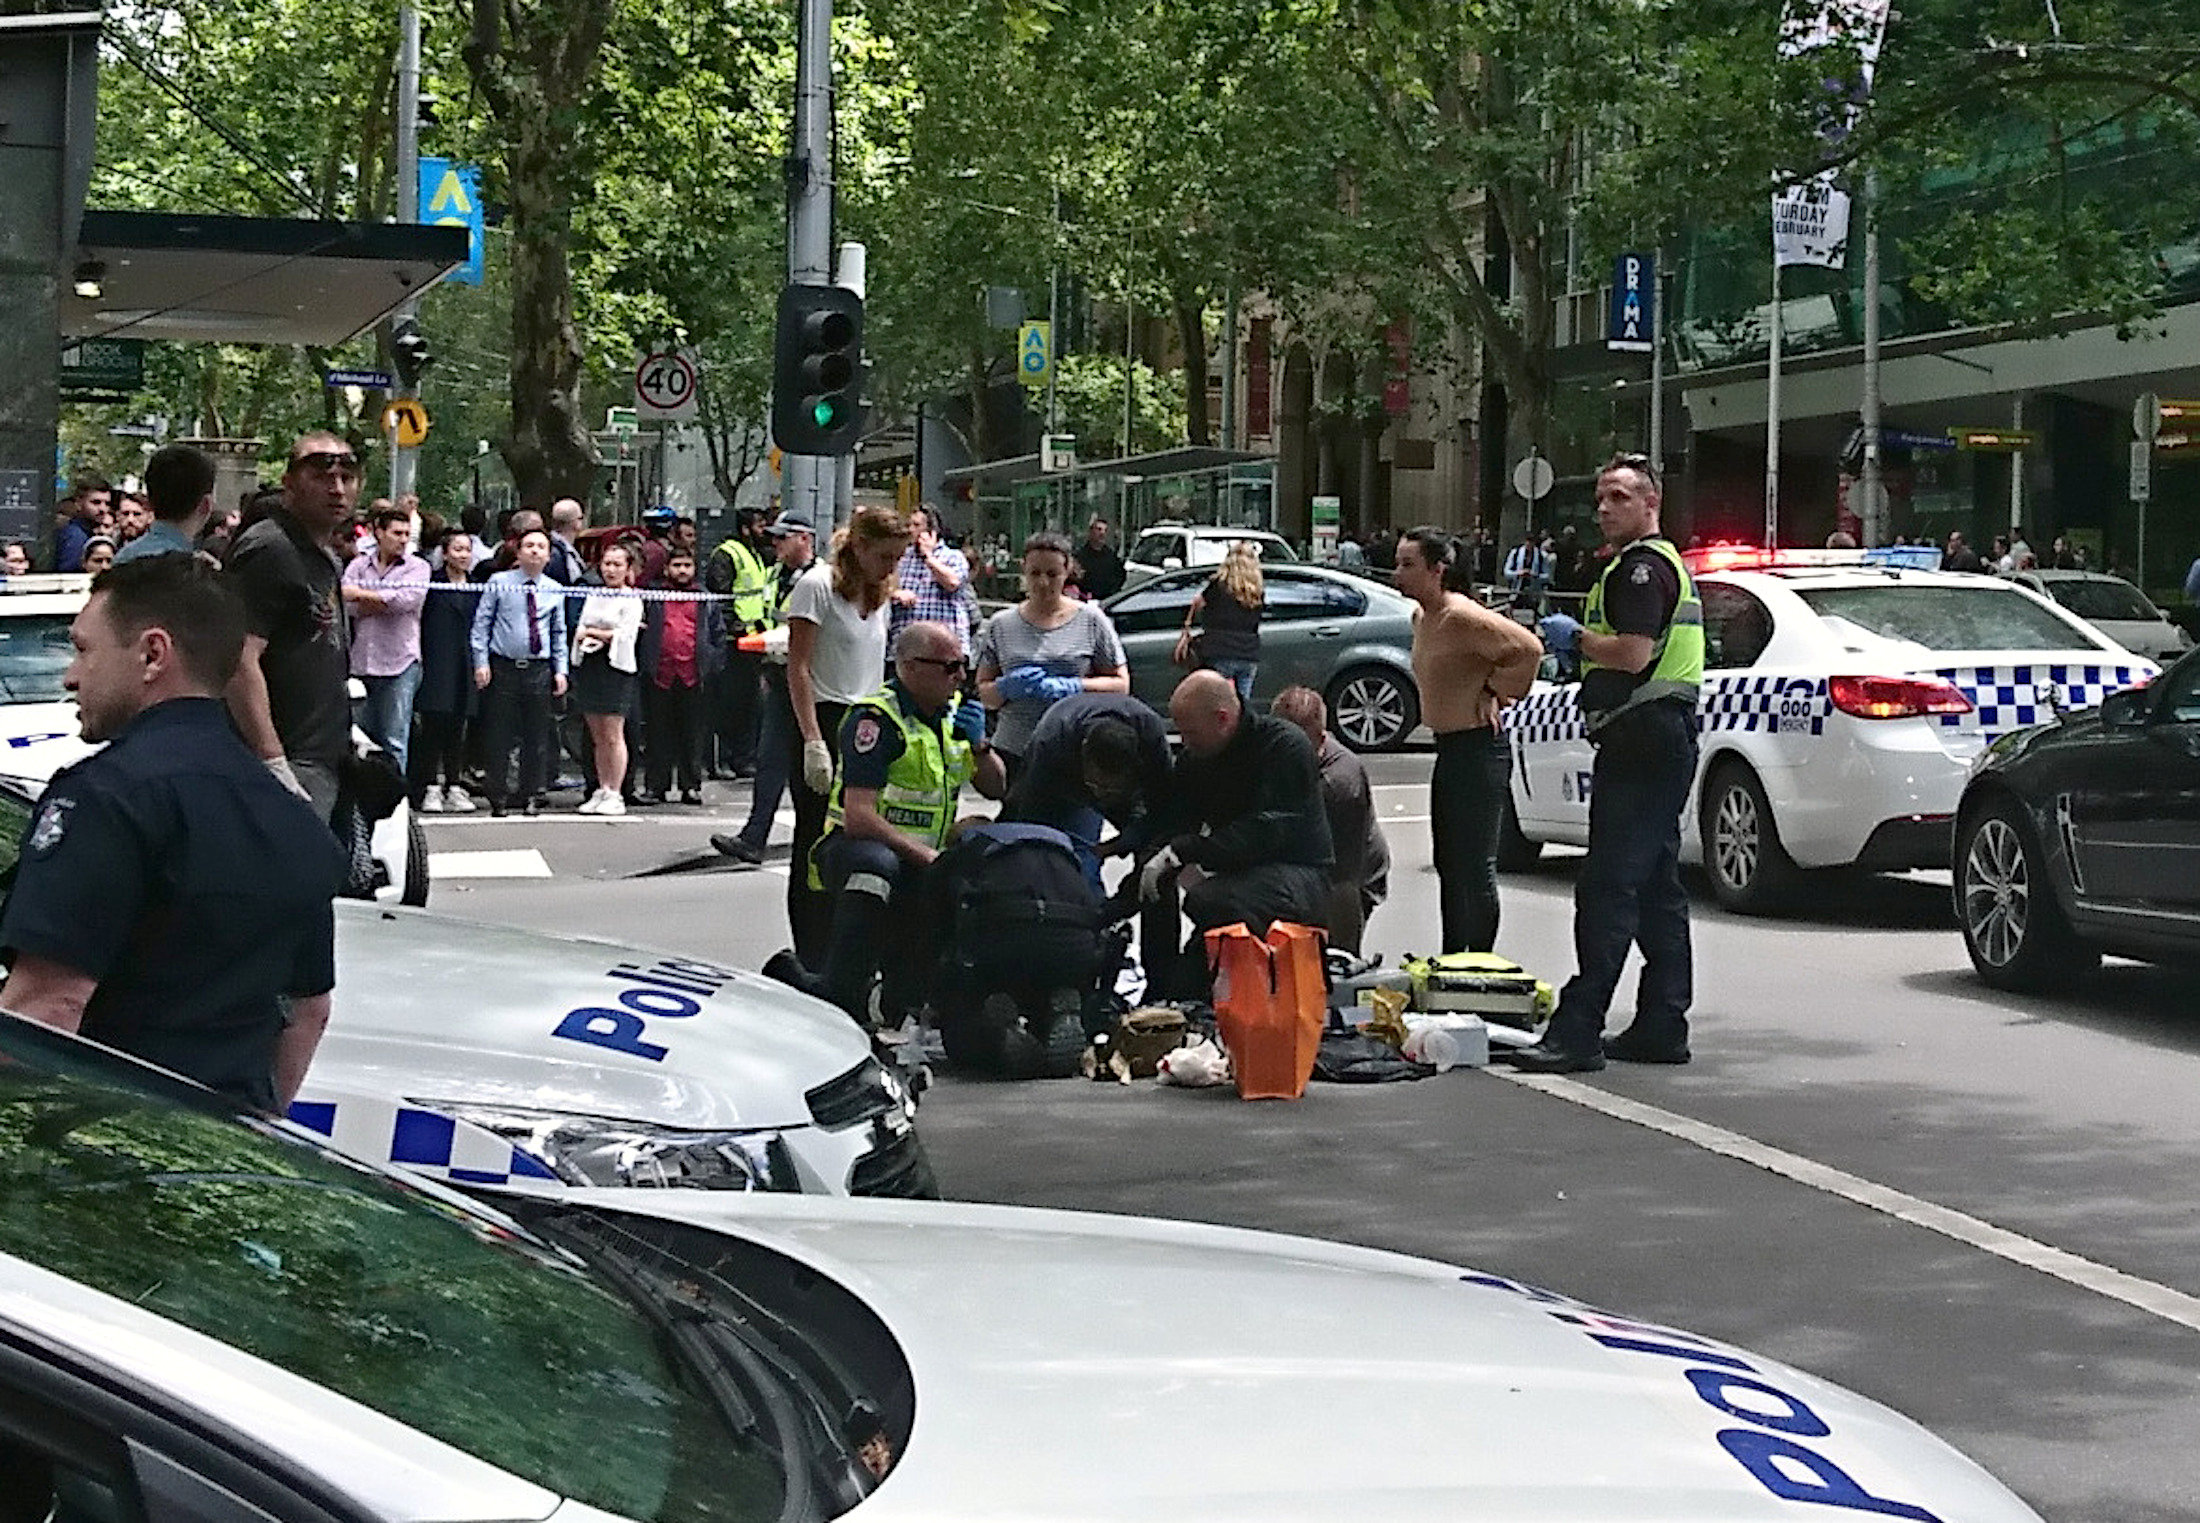 Members of the public watch as police and emergency services attend to an injured person after a car hit pedestrians in central Melbourne, Australia, January 20, 2017. AAP/Luke Costin/via REUTERS ATTENTION EDITORS - THIS IMAGE WAS PROVIDED BY A THIRD PARTY. EDITORIAL USE ONLY. NO RESALES. NO ARCHIVE. AUSTRALIA OUT. NEW ZEALAND OUT. TPX IMAGES OF THE DAY